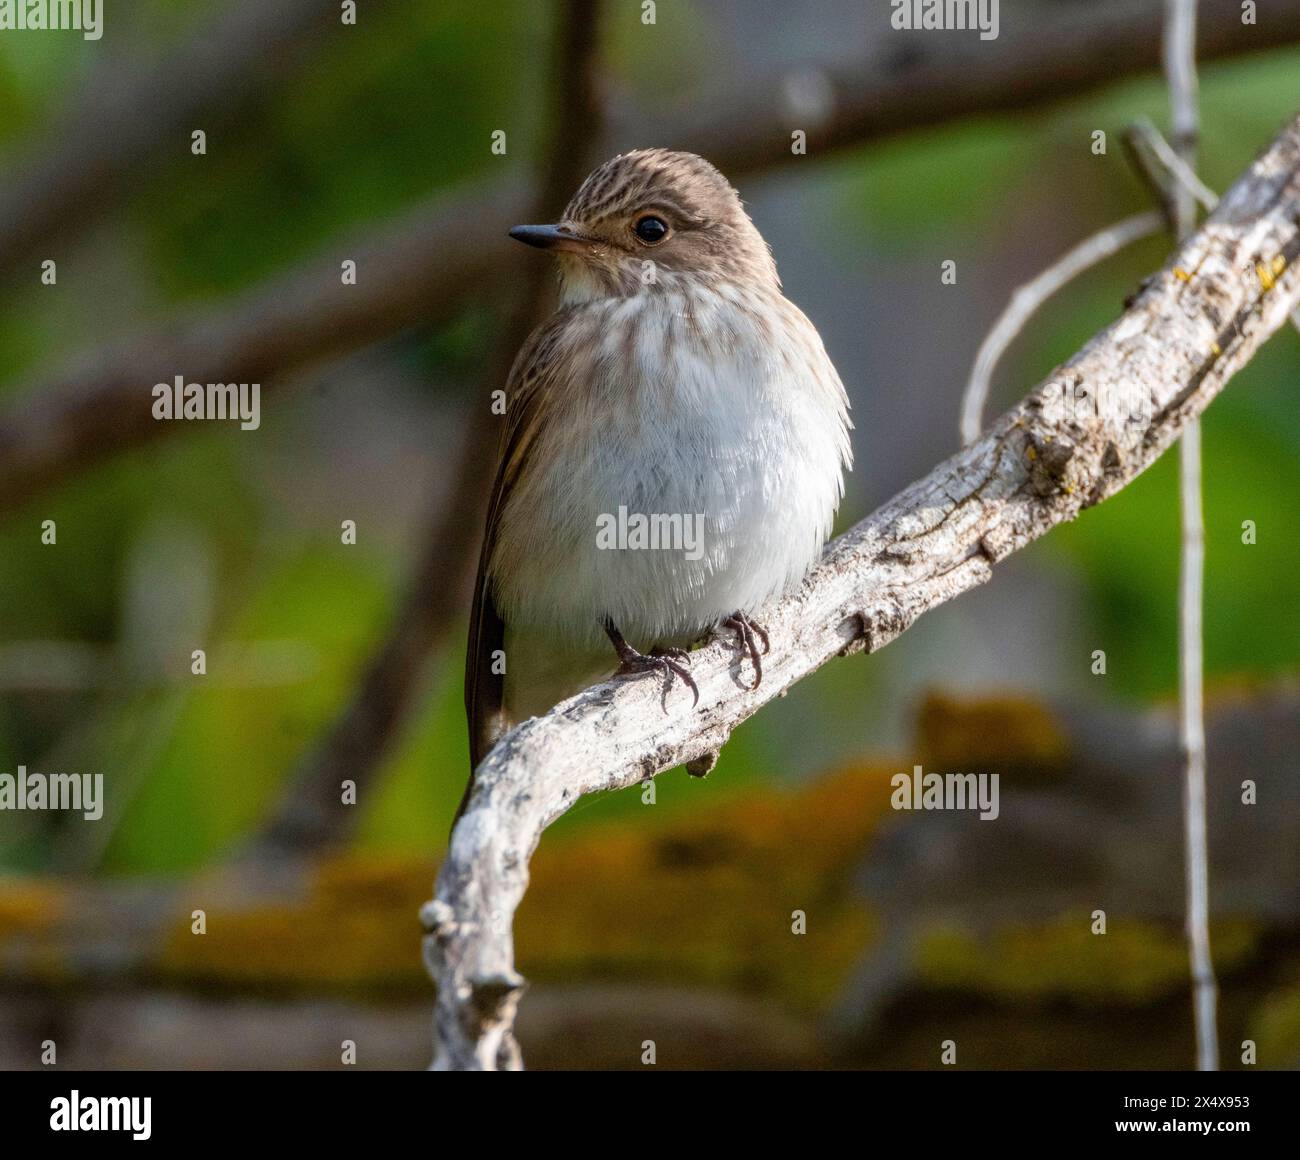 Spotted Flycatcher (Muscicapa striata) perched on a branch, Akrotiri, Cyprus Stock Photo